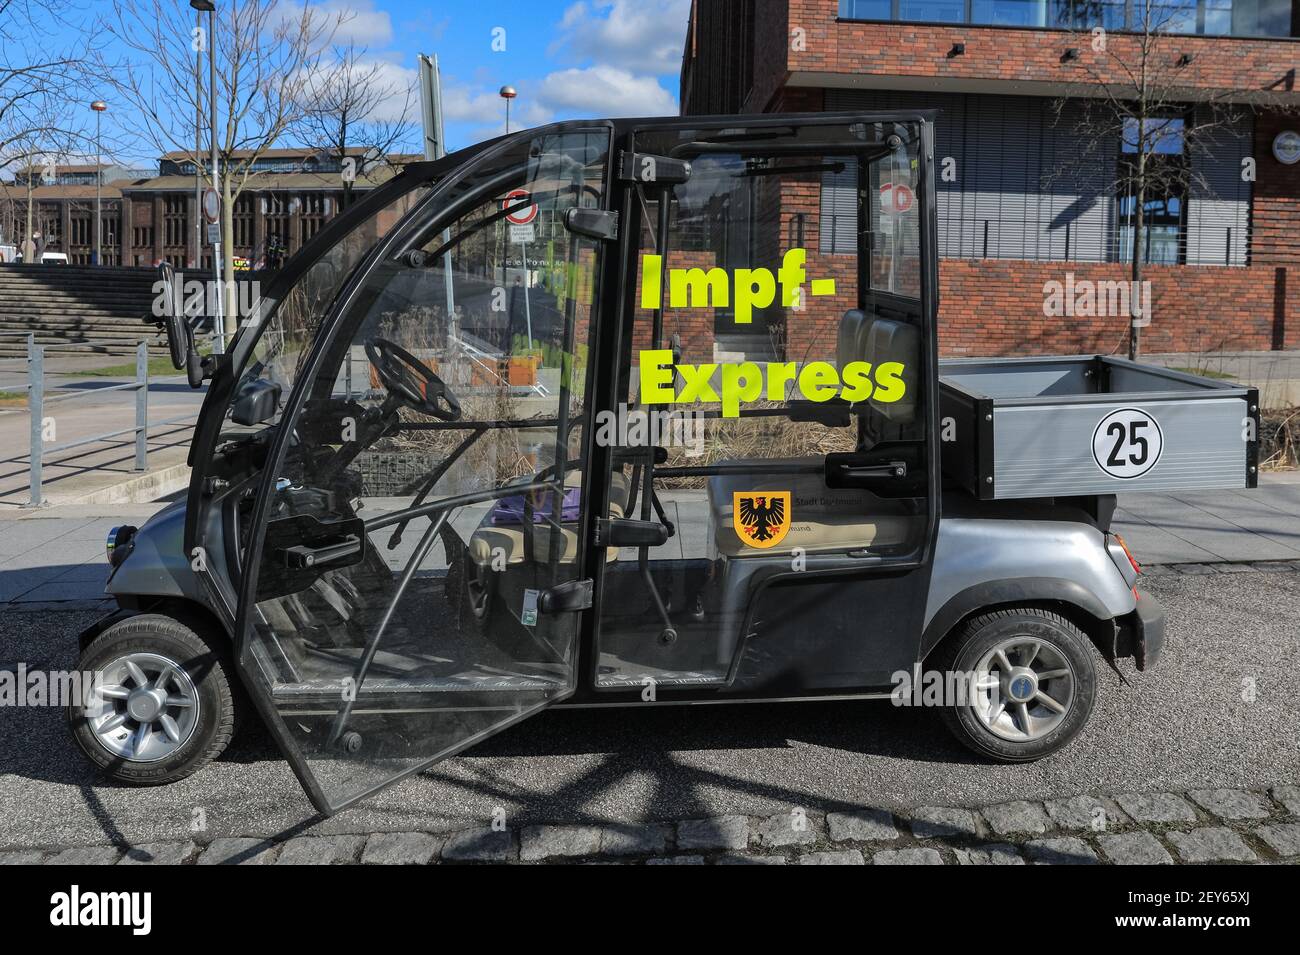 Dortmund, NRW, Germany, 05th Mar 2021. 'Impf-Express' a fleet of small electric cars is on stand-by for elderly and immobile people to be taken to the entrance. Phoenix West, a former blast furnace and industrial site now housing culture and music venues is currently Dortmund's largest and busiest vaccination centre. The vaccination campaign in Germany is picking up momentum. Earlier this week, The German health ministry and vaccination commission STIKO cleared Astra Zeneca's vaccine for use in the over 65 age group. In addition, GP practices can start administering vaccinations soon. Accordi Stock Photo